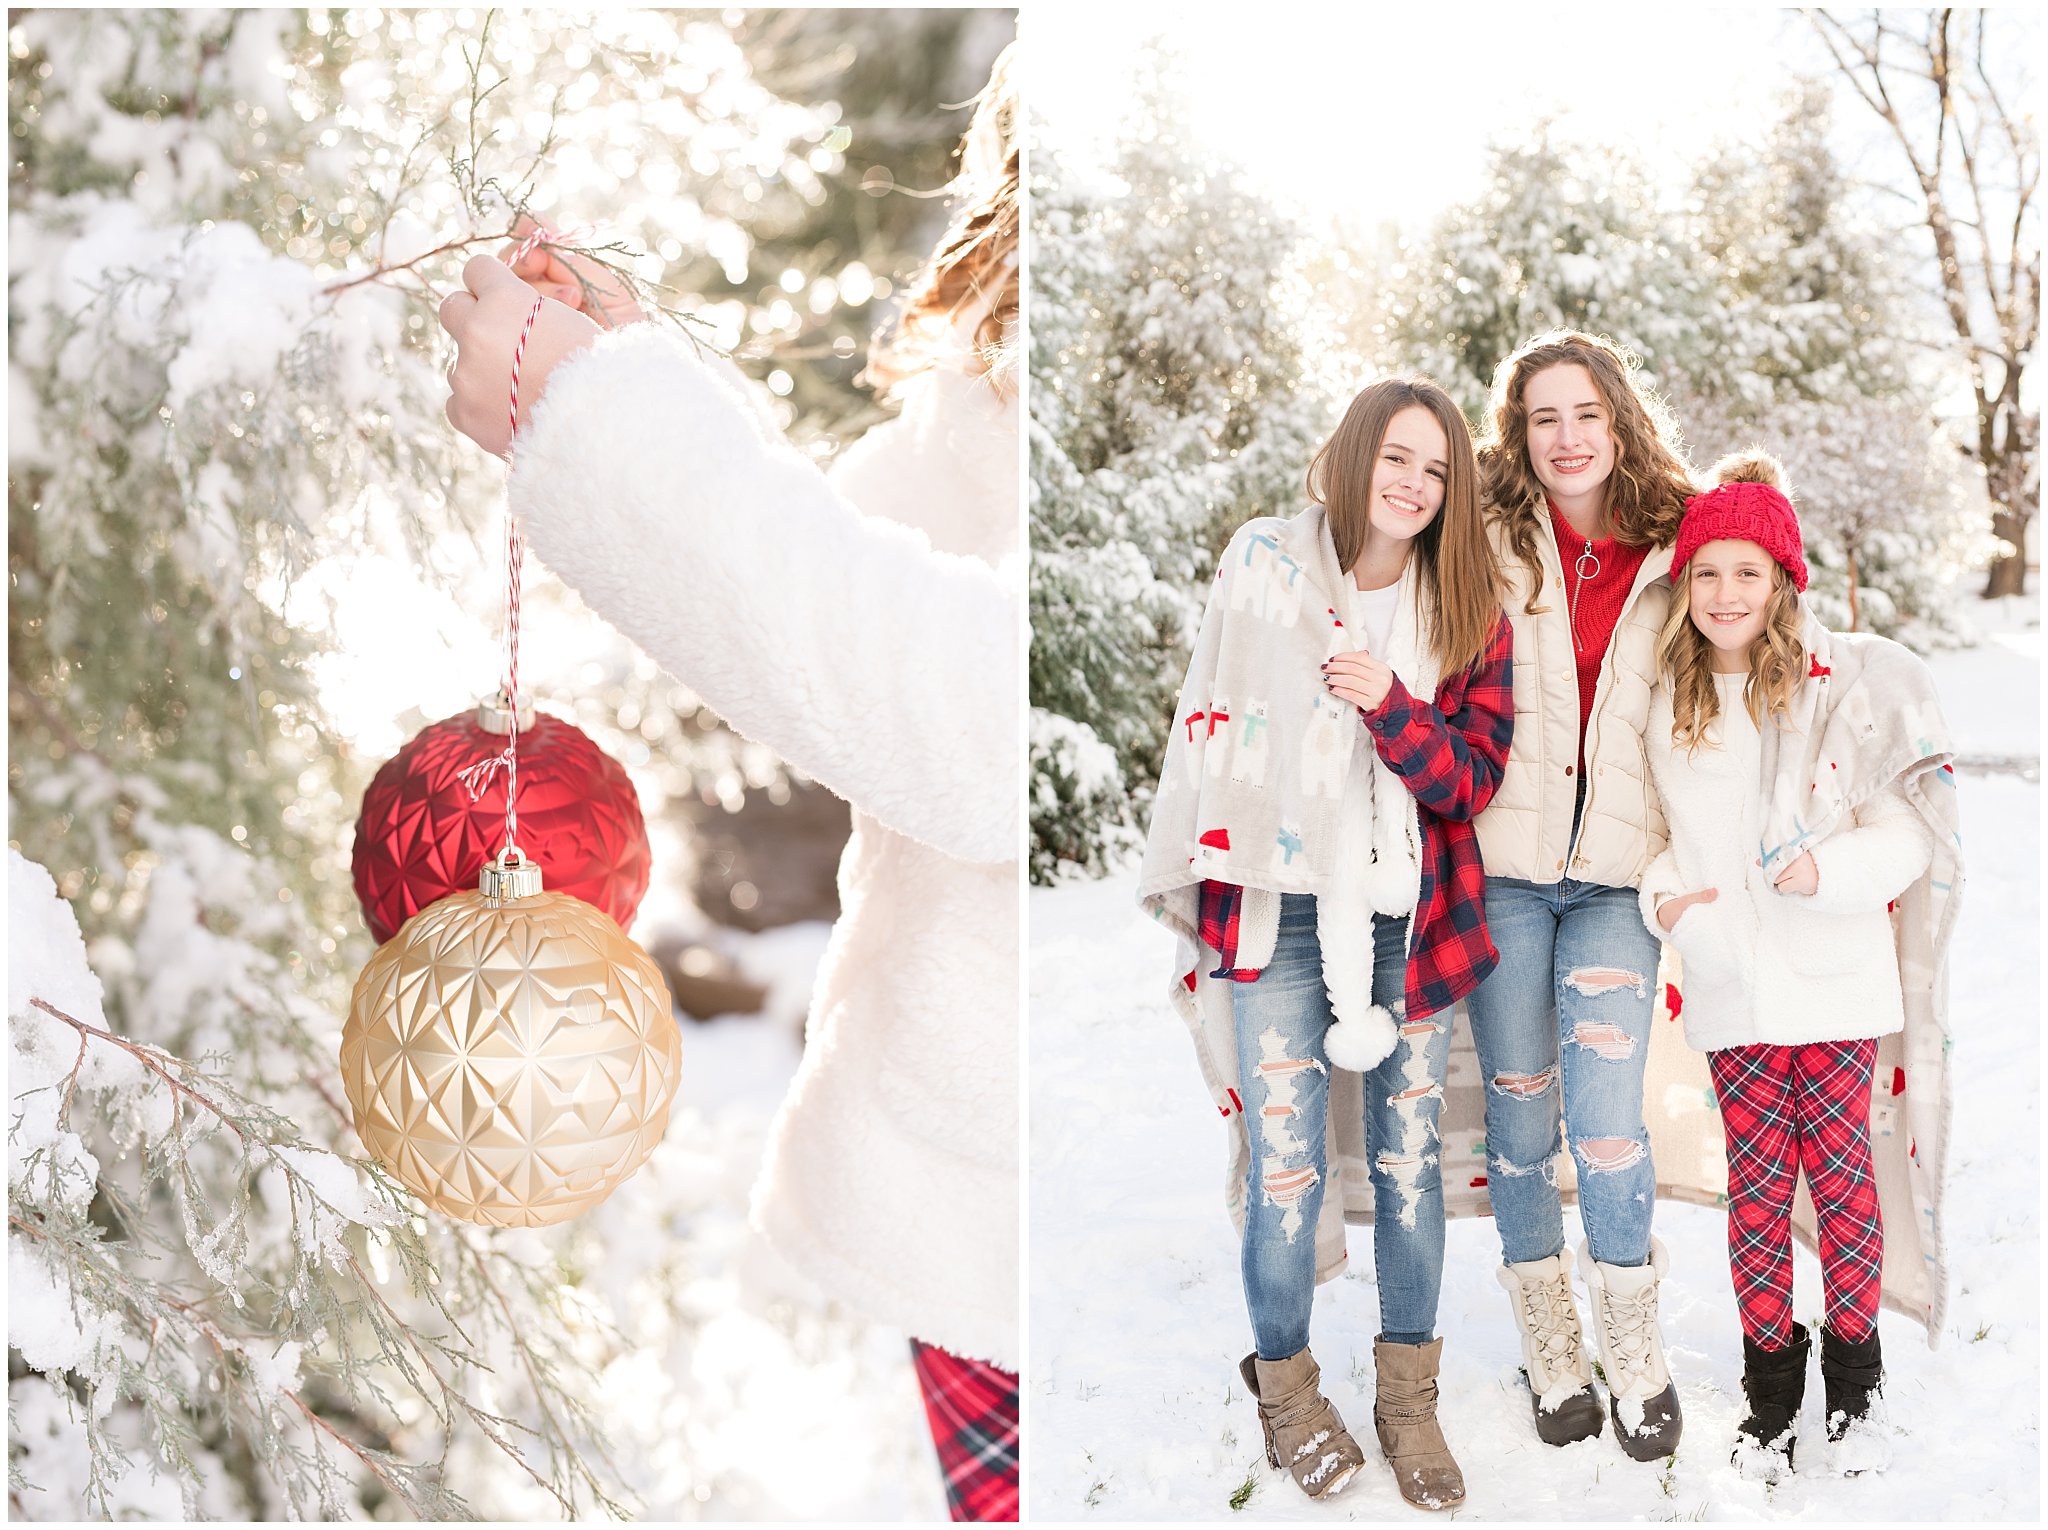 Family putting ornaments on trees in the snow | Utah Family Christmas Photoshoot | Oak Hills Reception and Event | Jessie and Dallin Photography